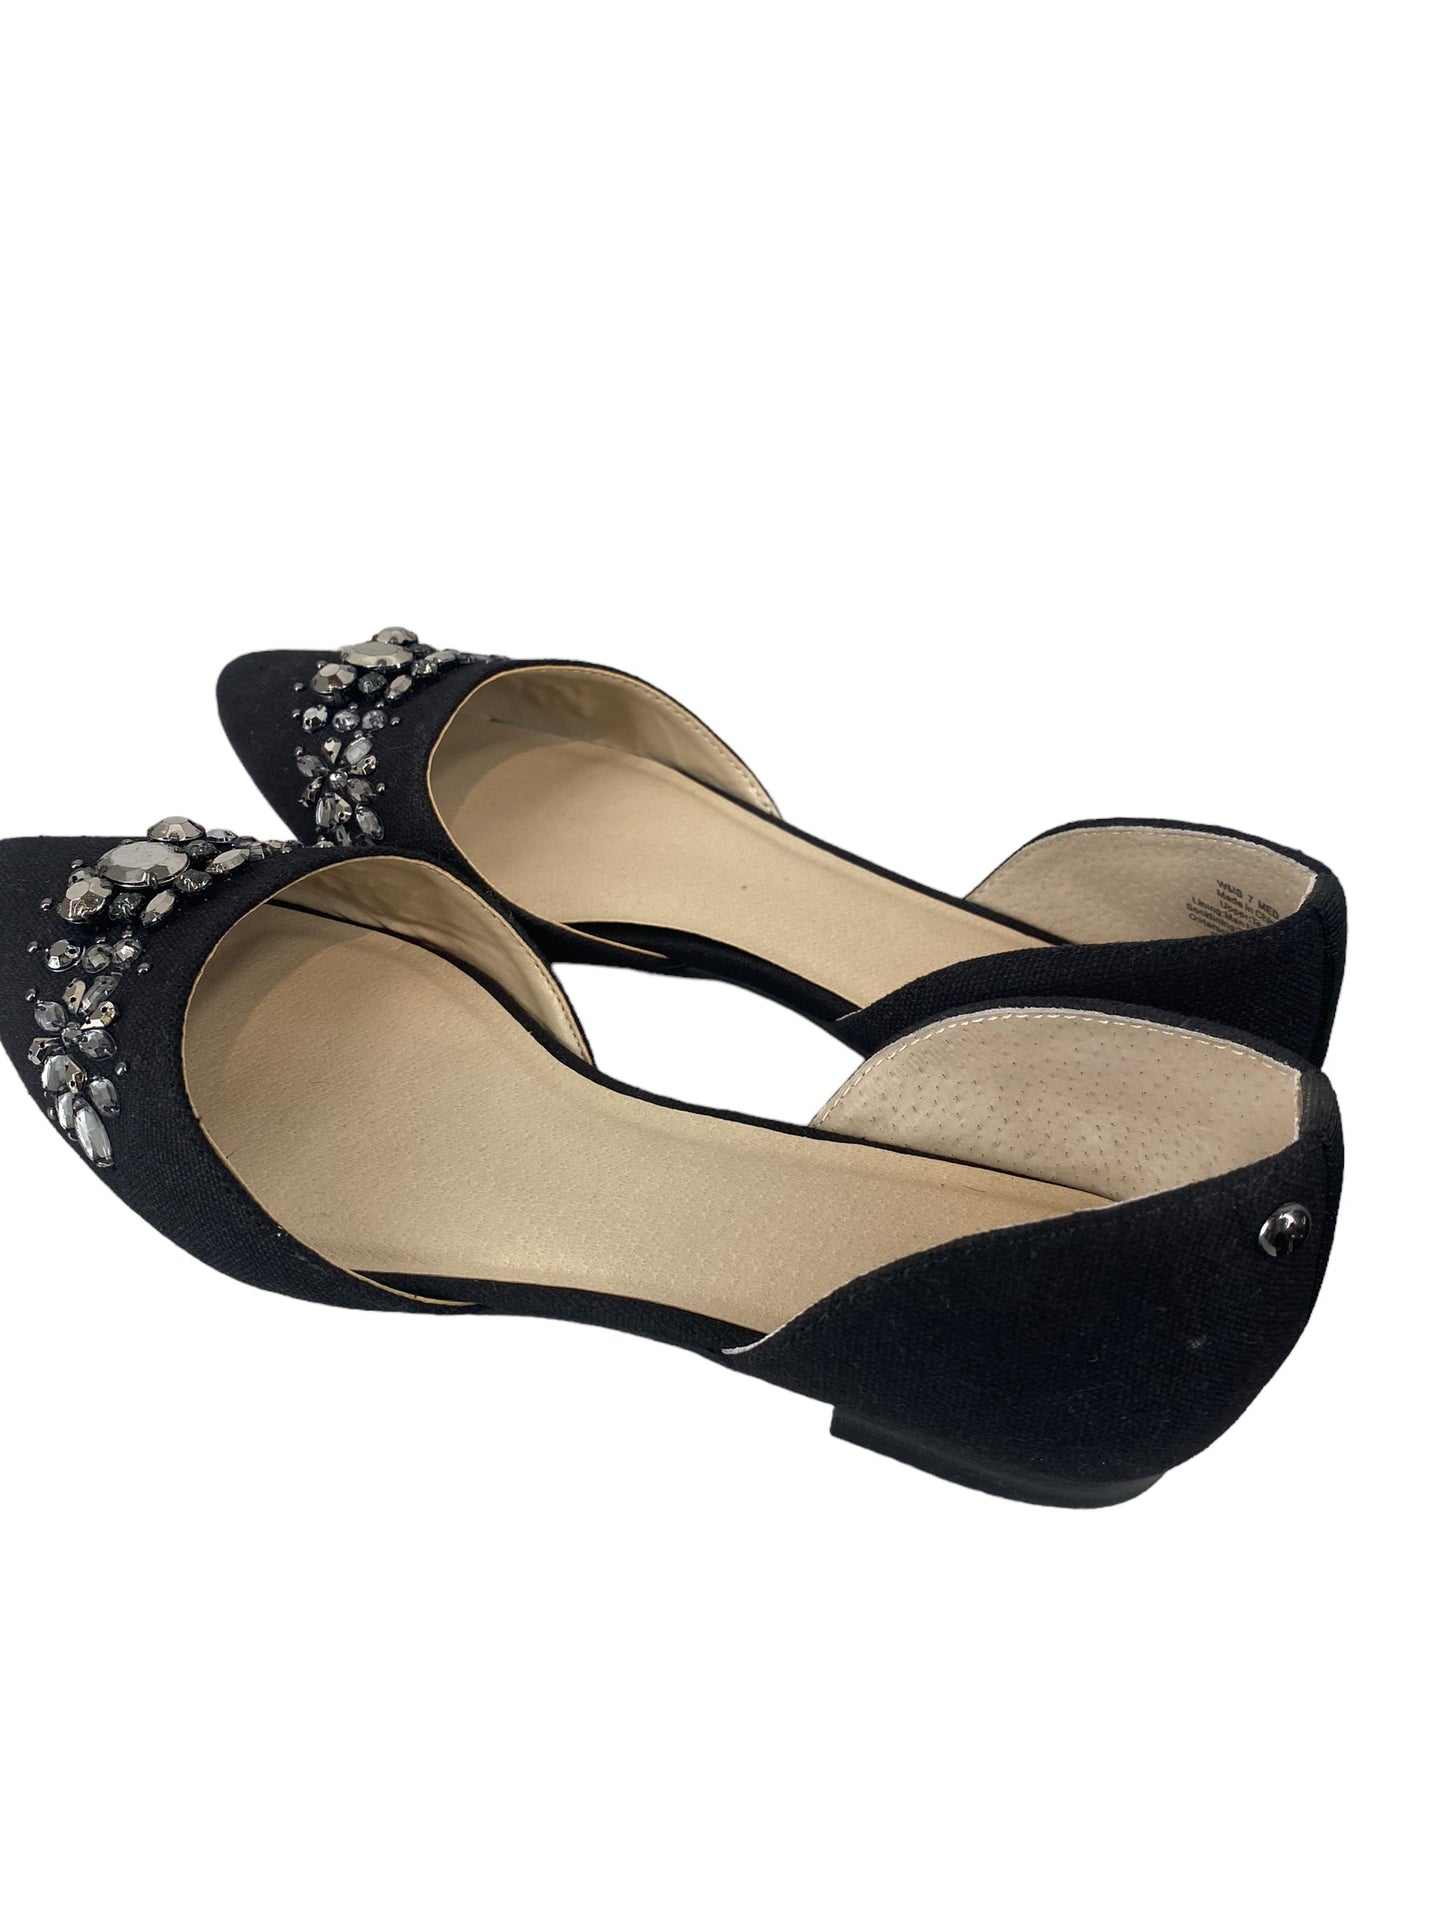 Shoes Flats By Simply Vera  Size: 7